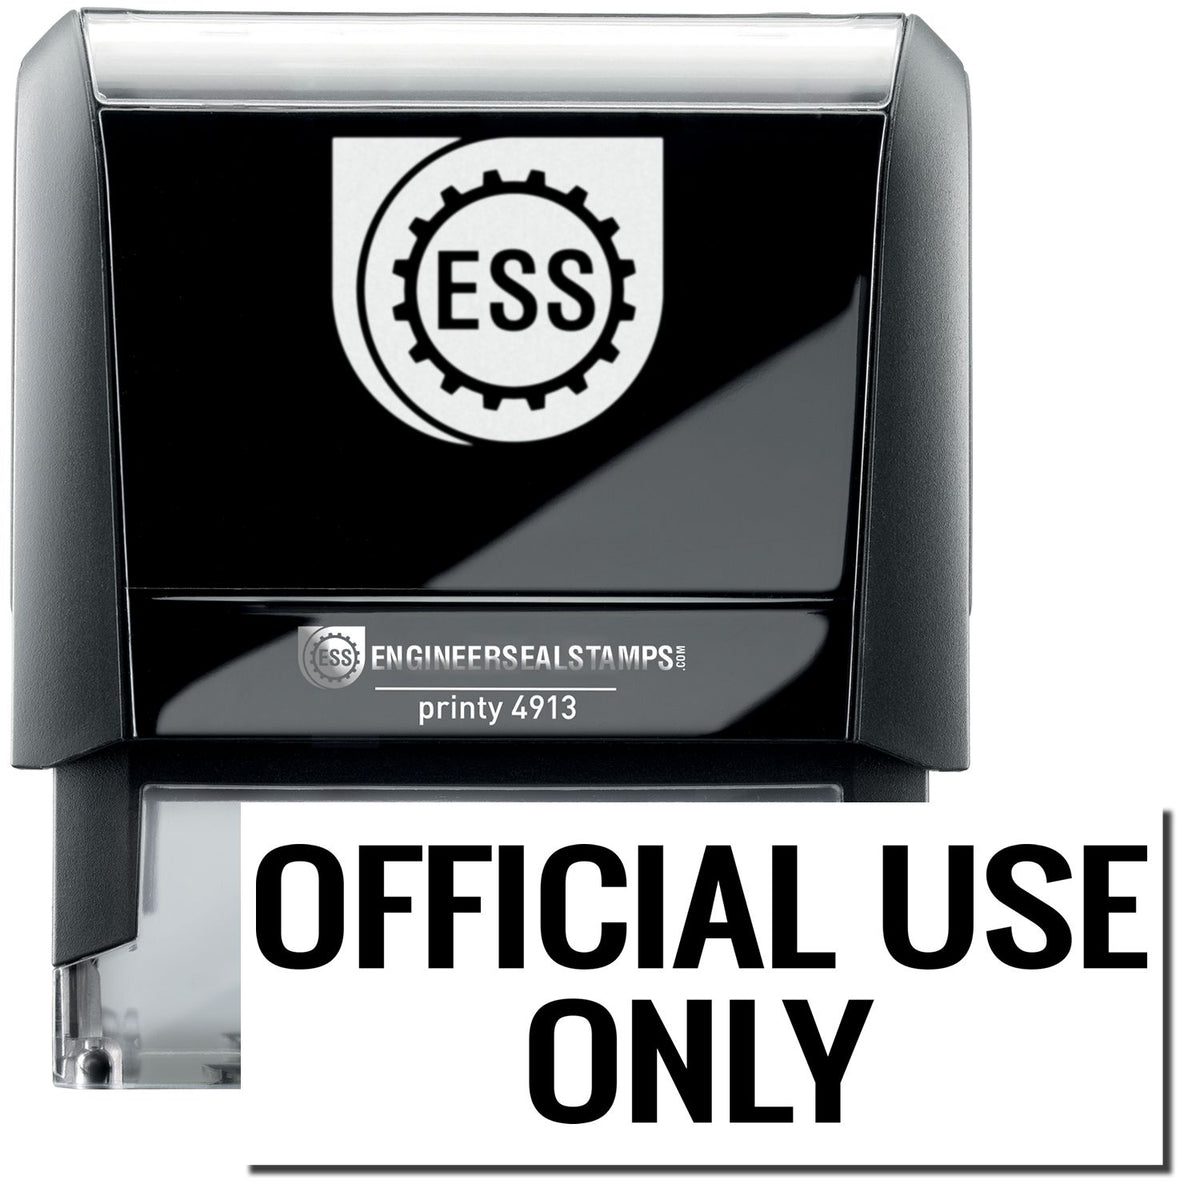 A self-inking stamp with a stamped image showing how the text &quot;OFFICIAL USE ONLY&quot; in a large font is displayed by it after stamping.